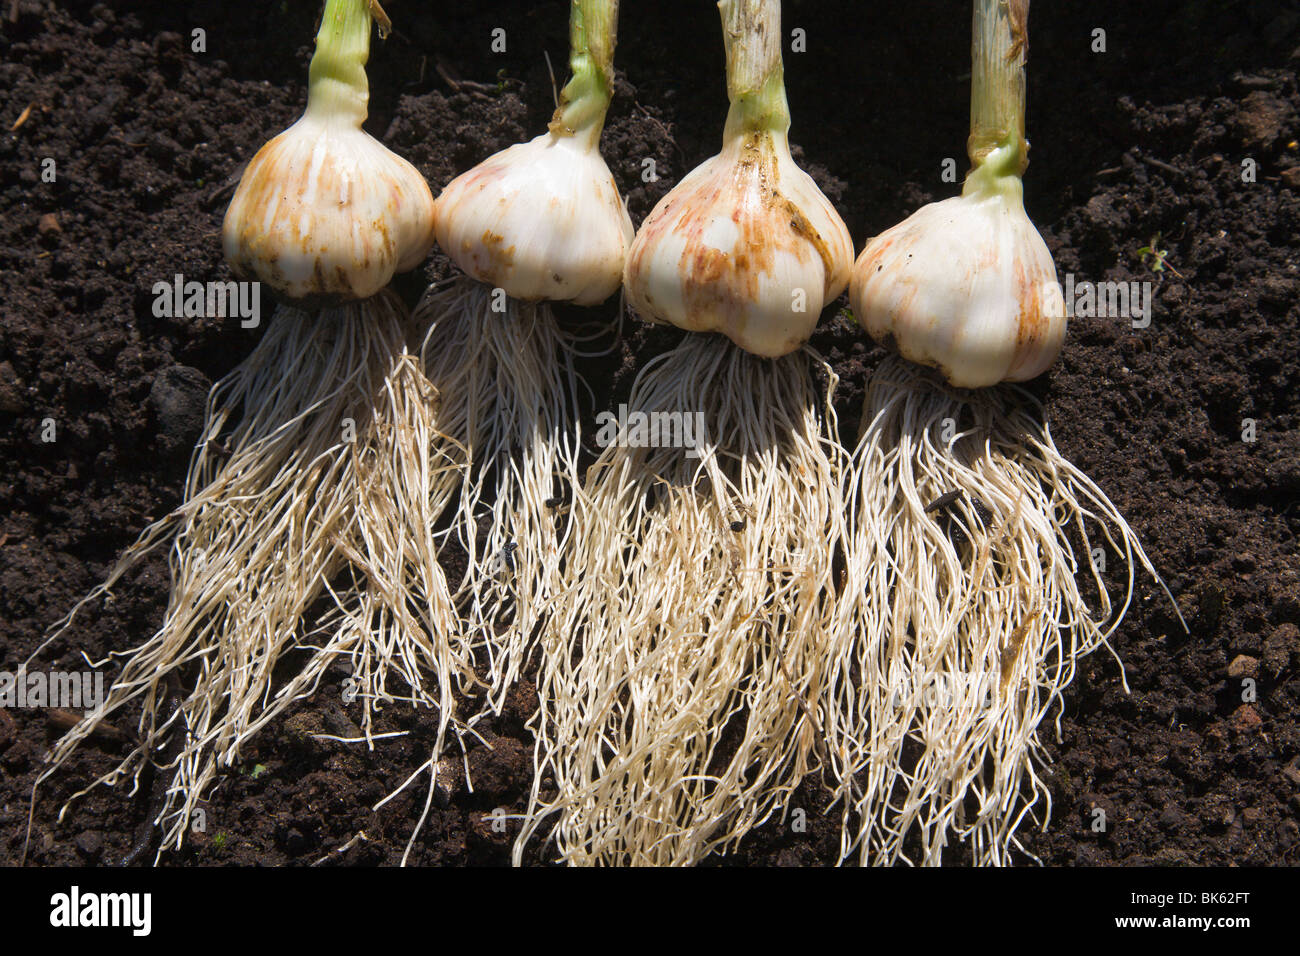 [Home grown] garlic [left to dry] in the sun, Wirral, England Stock Photo